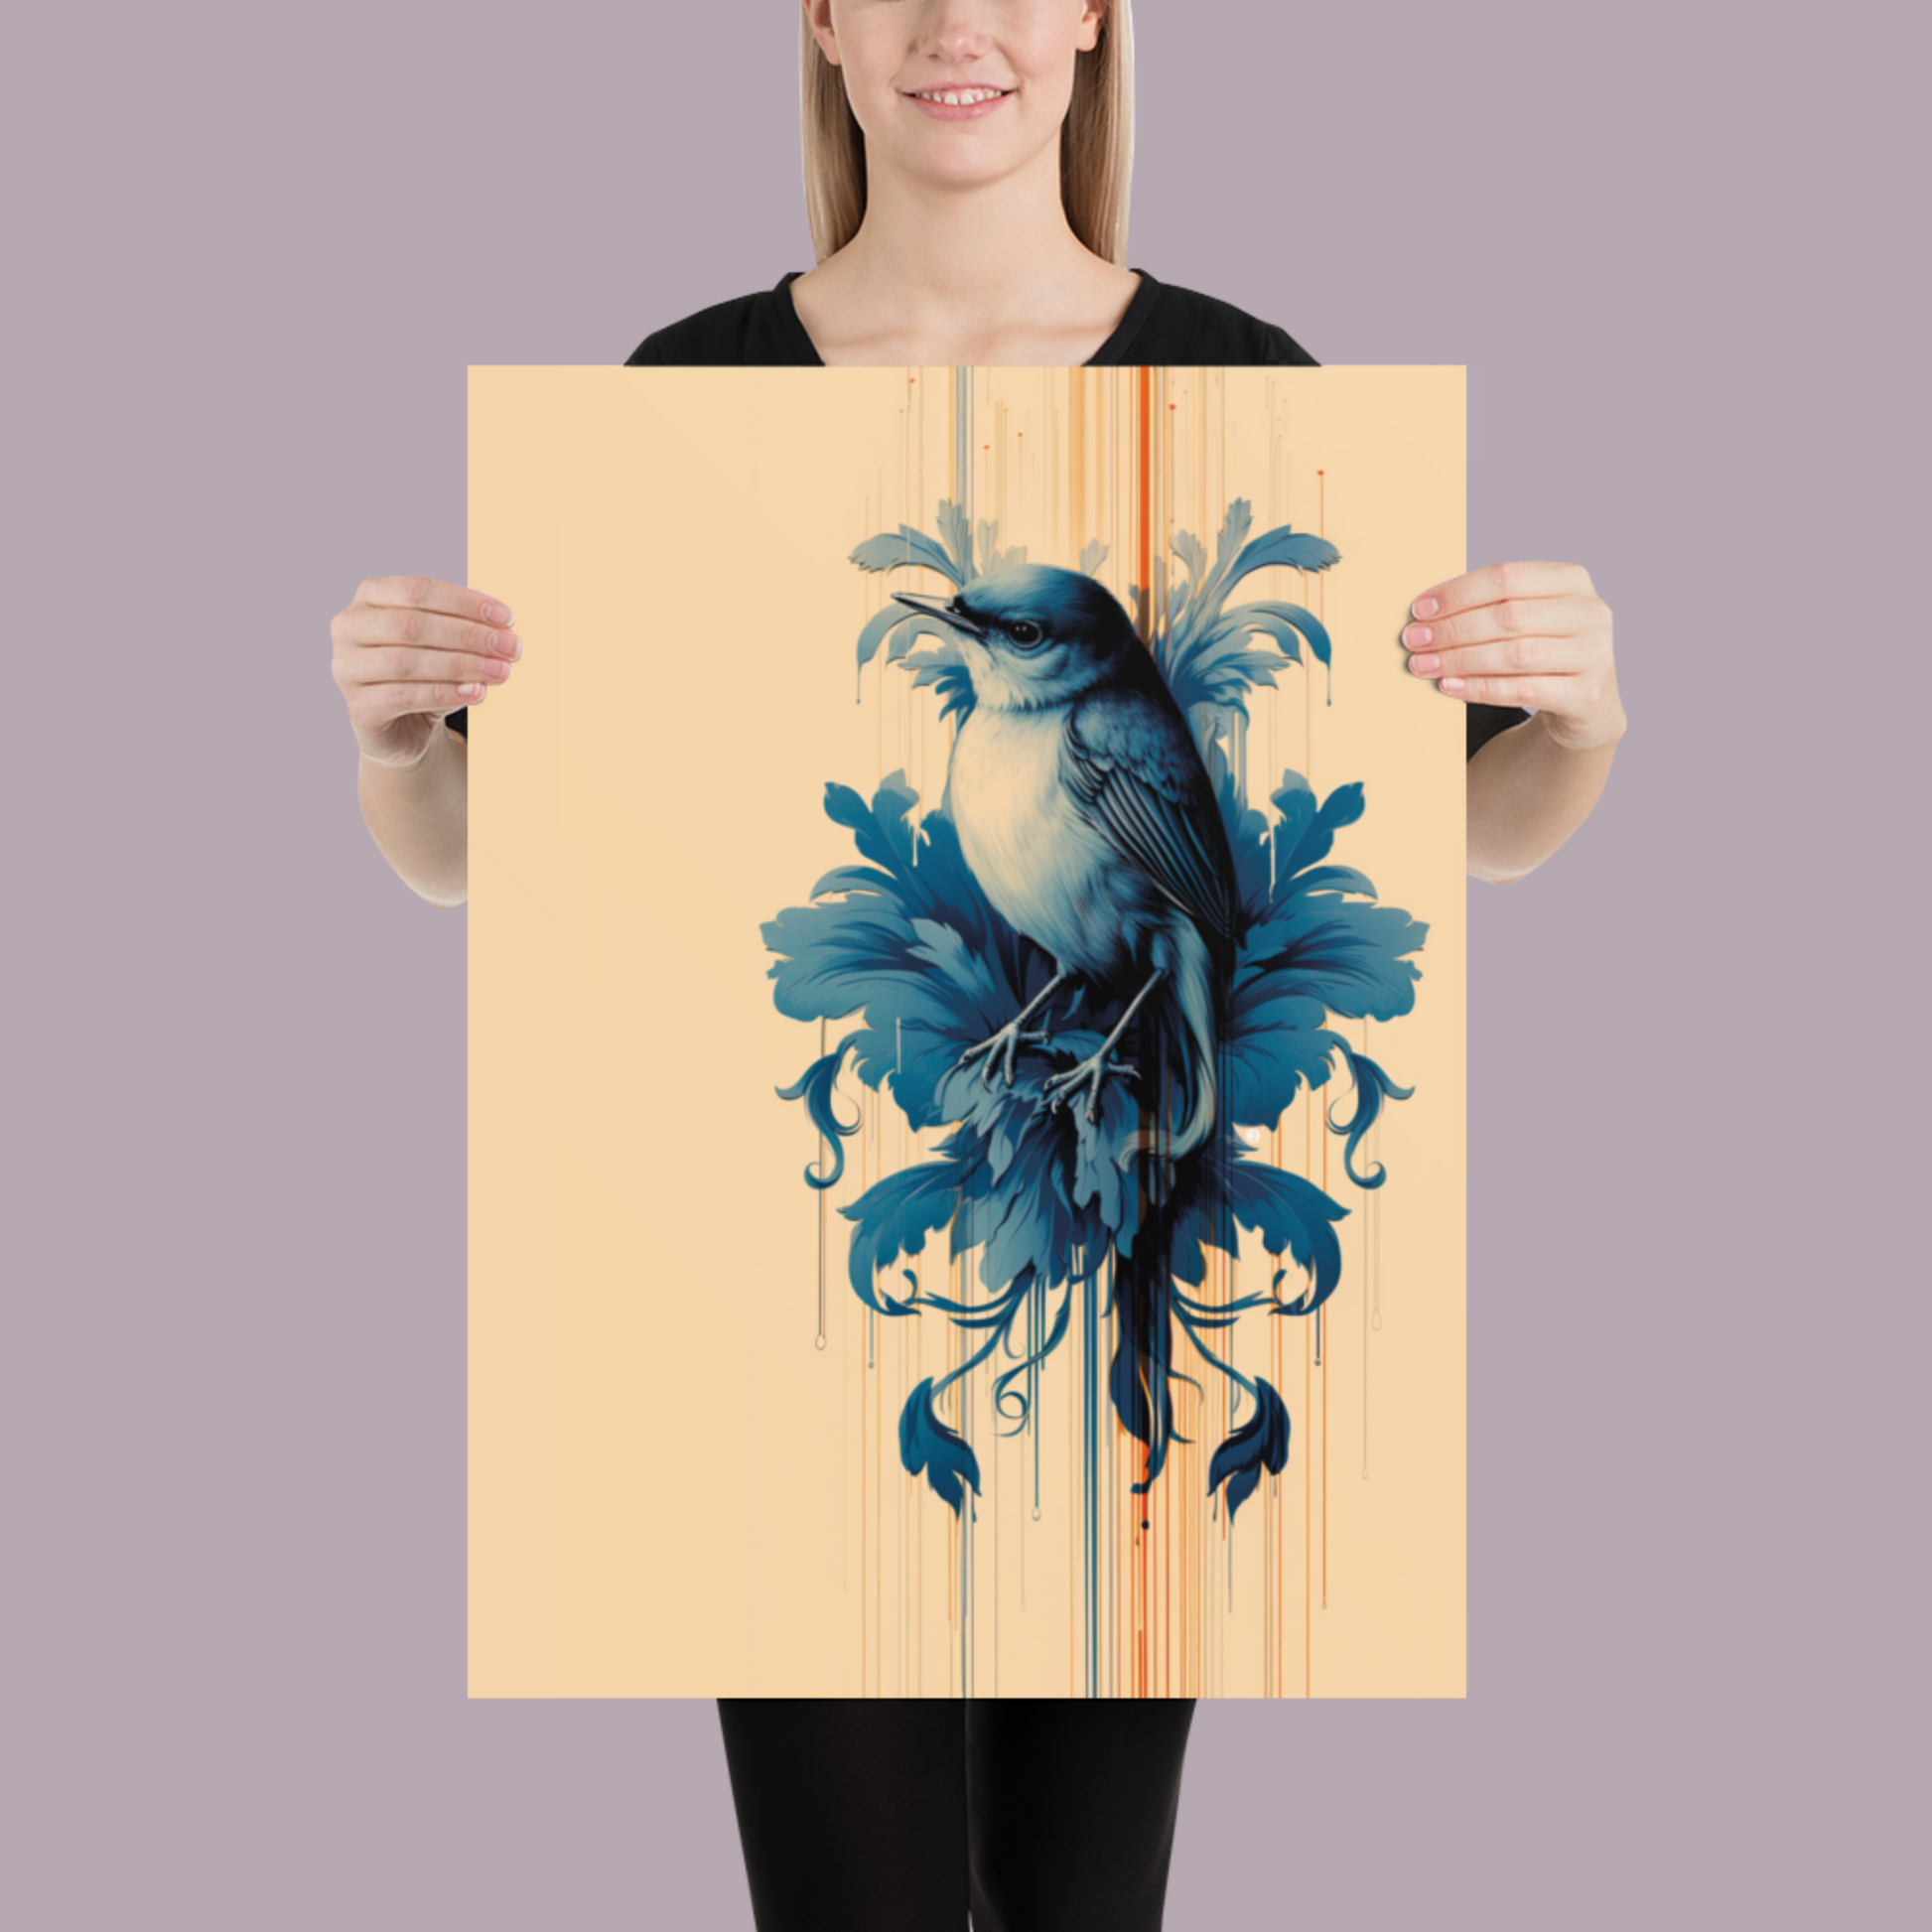 "Avian Nouveau Museum-Quality Poster held by woman - Size: 18x30 inches.